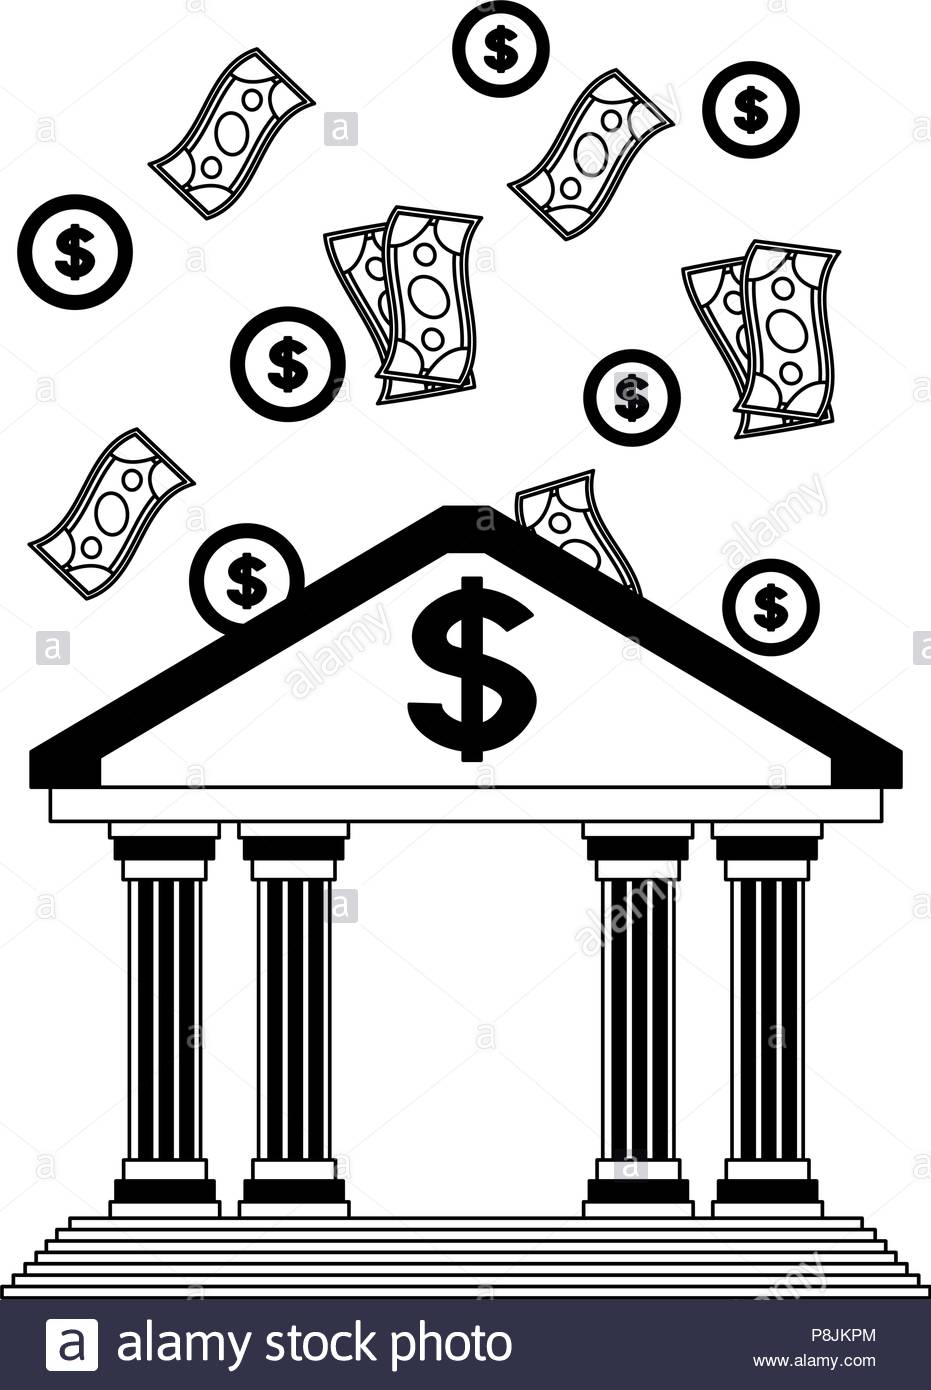 Money falling to bank building black and white Stock Vector Art.